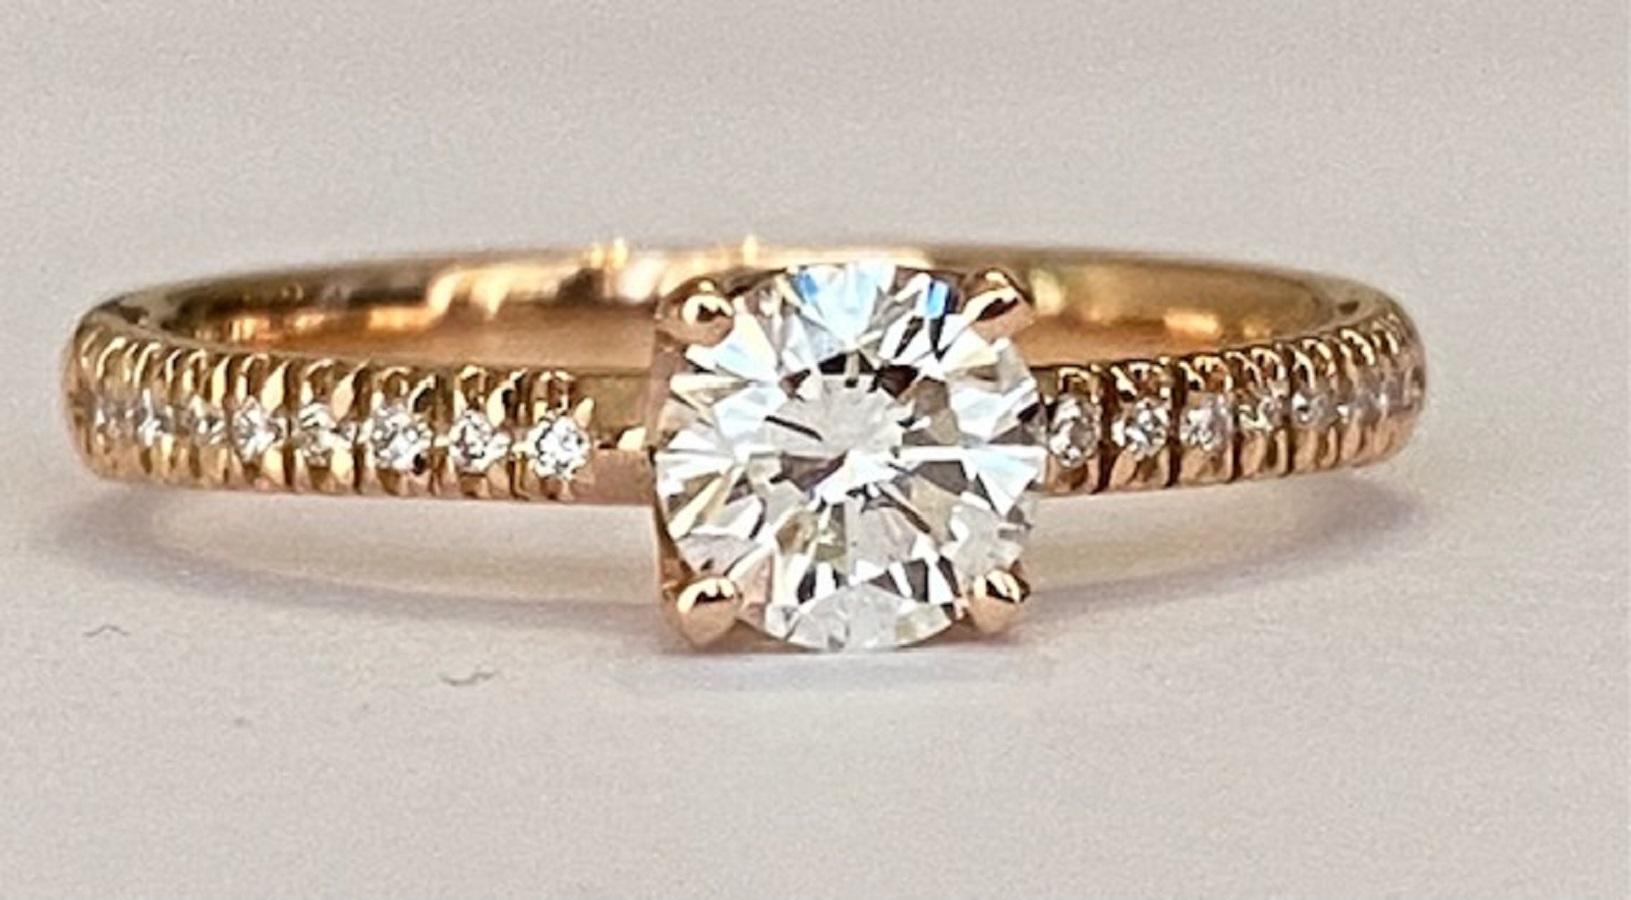 18 kt pink gold solitaire ring with a 0.50 ct brilliant-cut diamond of quality E/VS1 and 18 pieces of brilliant-cut diamonds in total approx. 0.08 ct E-F/VS.
ALGT certificate is included. Excellent engagement ring with beautifull diamonds.
Grade: 18